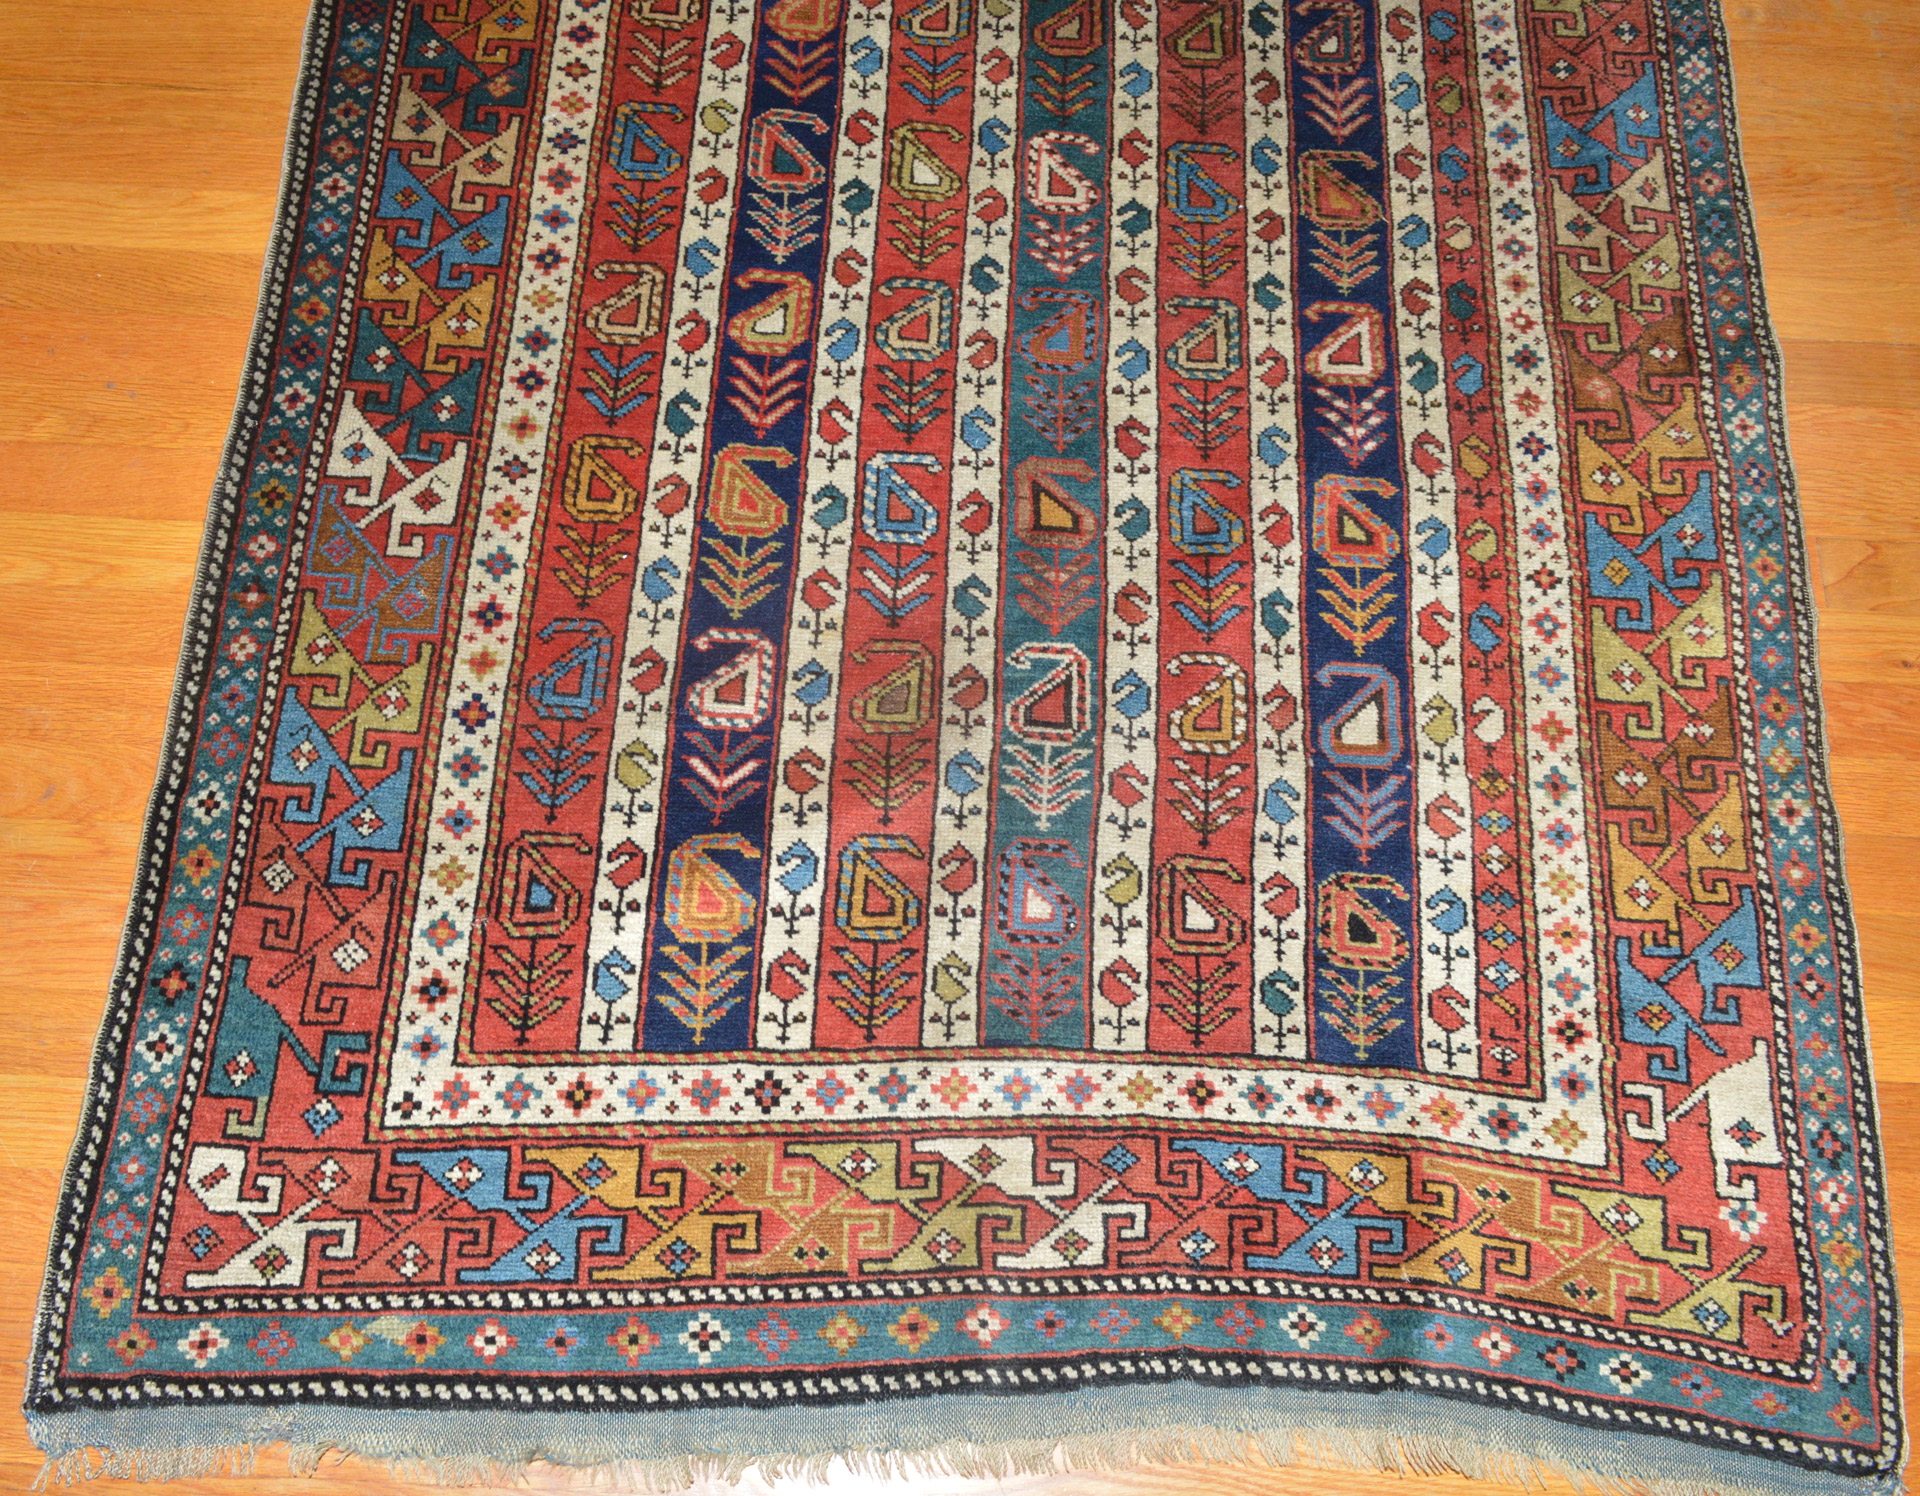 Field and border detail from an antique Caucasian Shirvan long rug with vertical stripes and Both (Paisley shaped motifs) - Douglas Stock Gallery antique Oriental rugs, South Natick (Boston area),MA - antique tribal rugs, antique Caucasian rugs, one of New England's finest sources for antique Oriental rugs